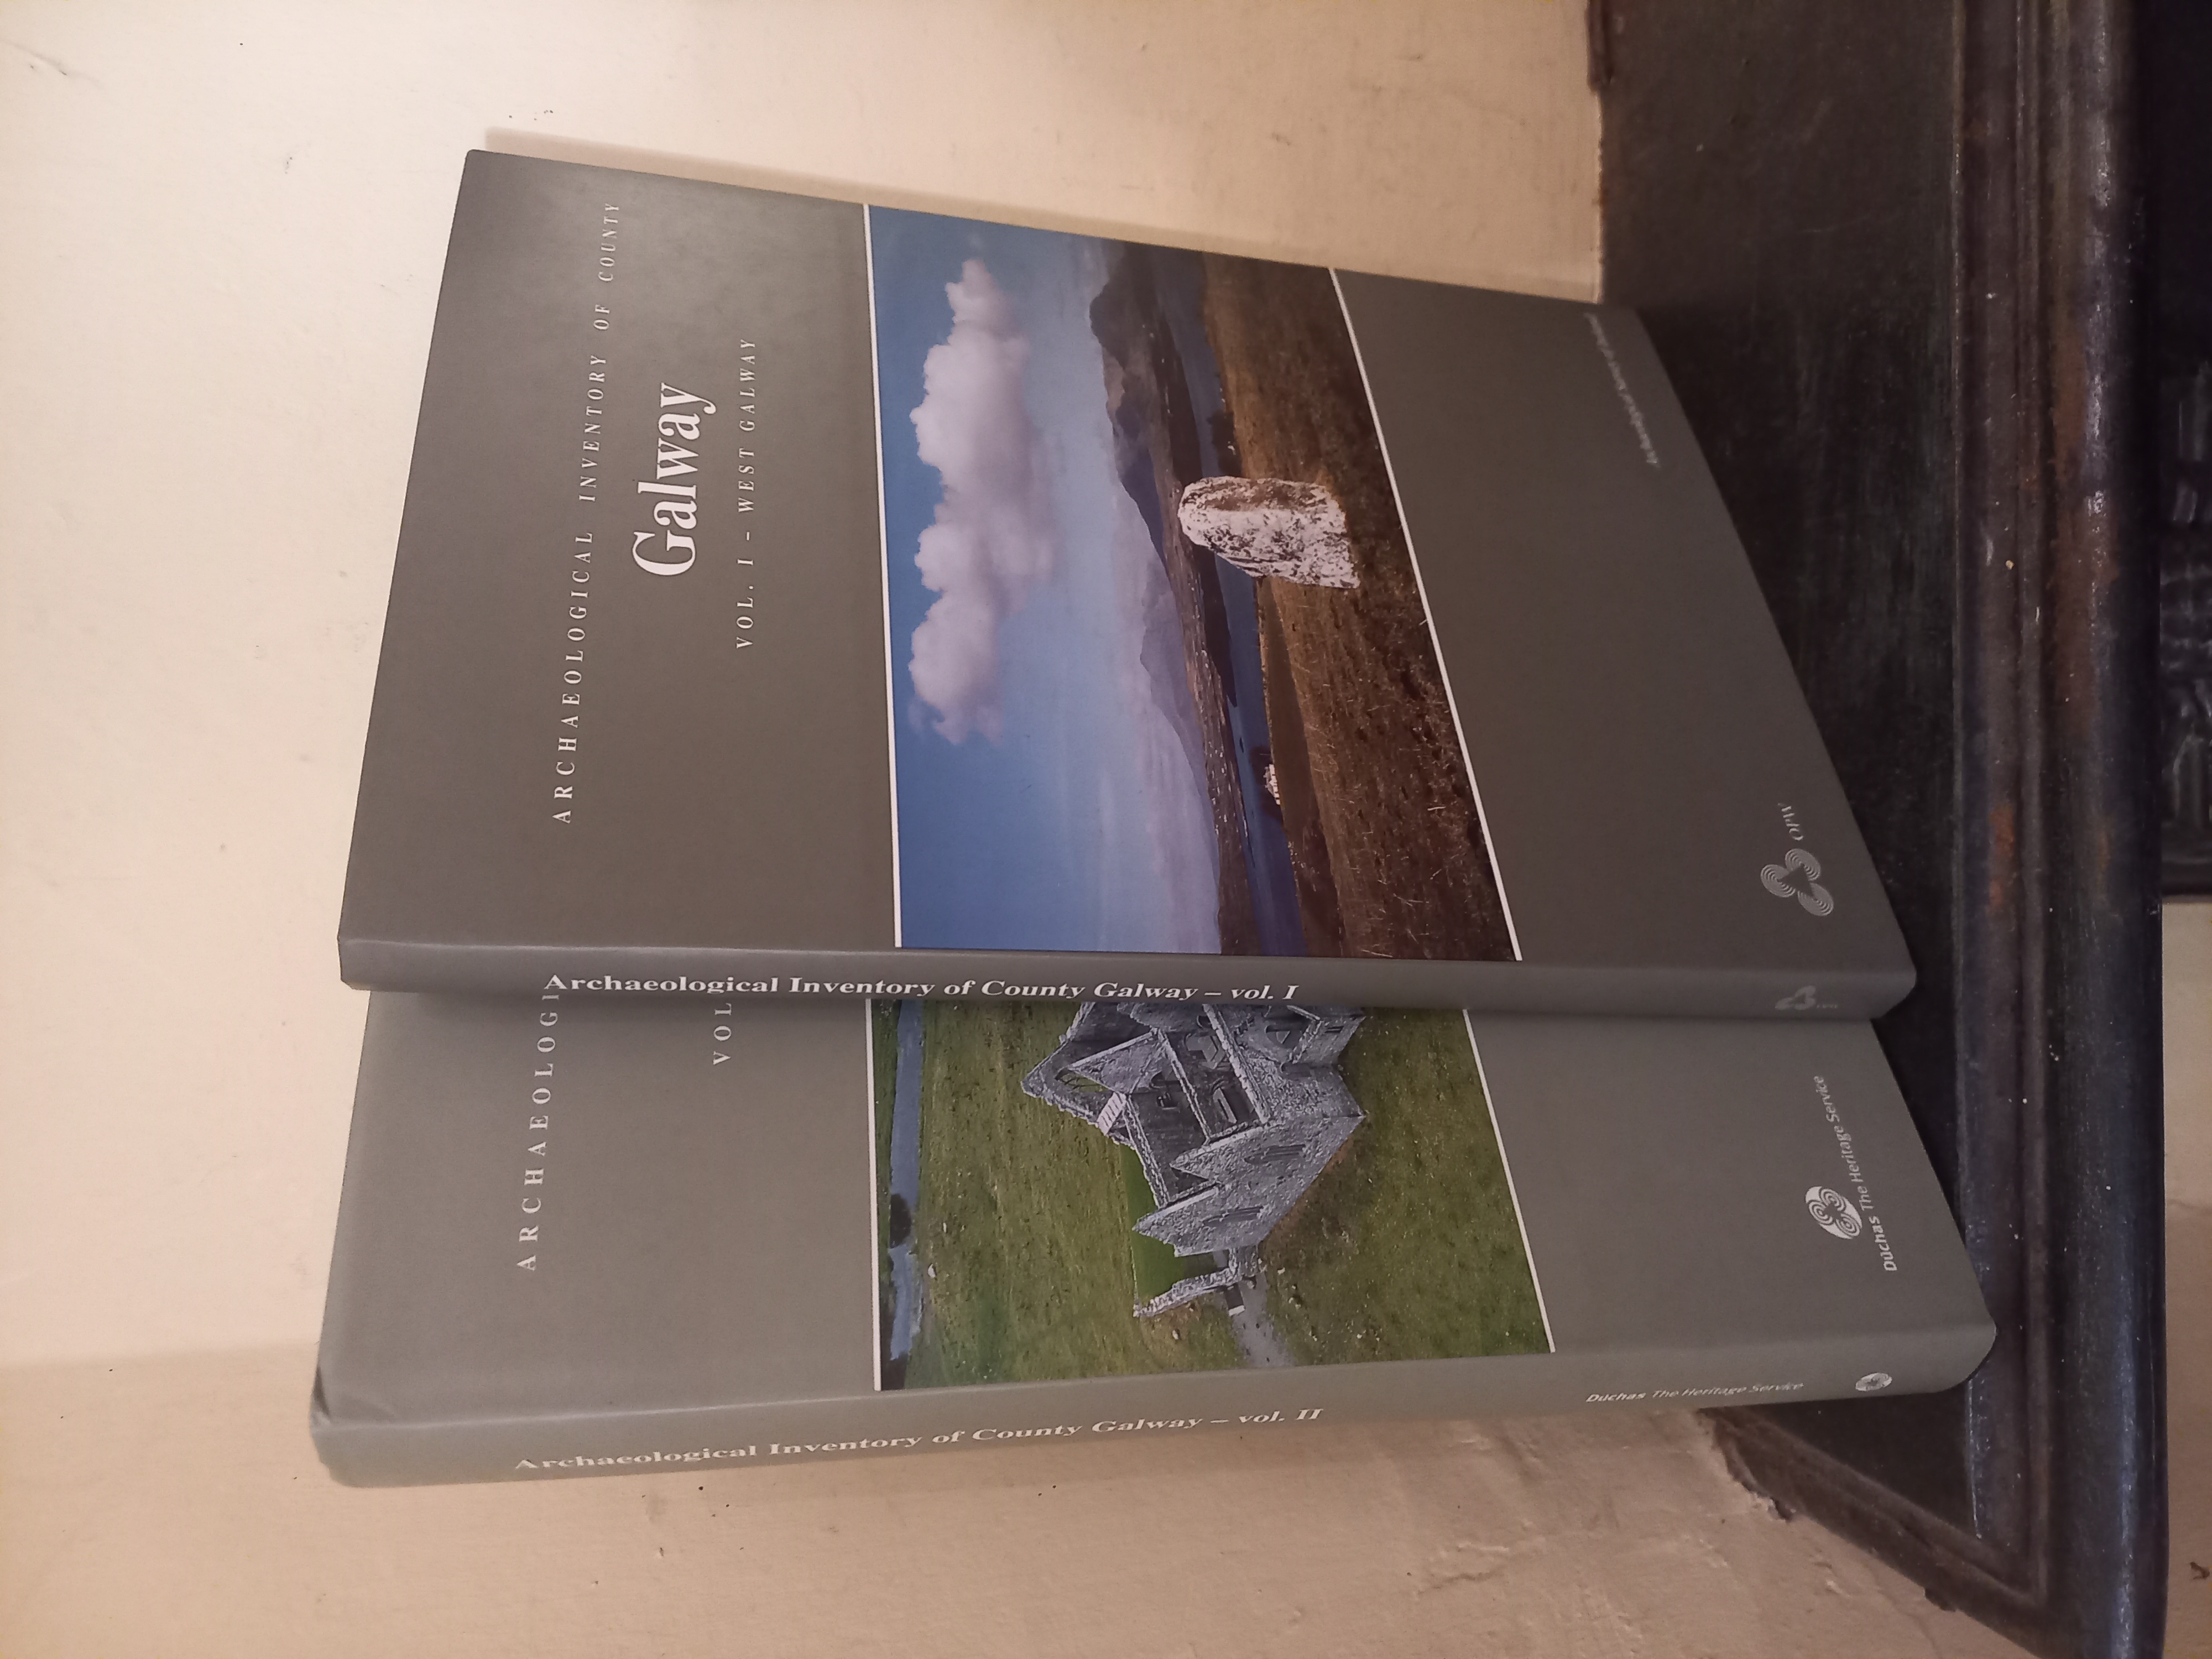 Archaeological inventory of County Galway - Two Volumes - Gosling, Paul